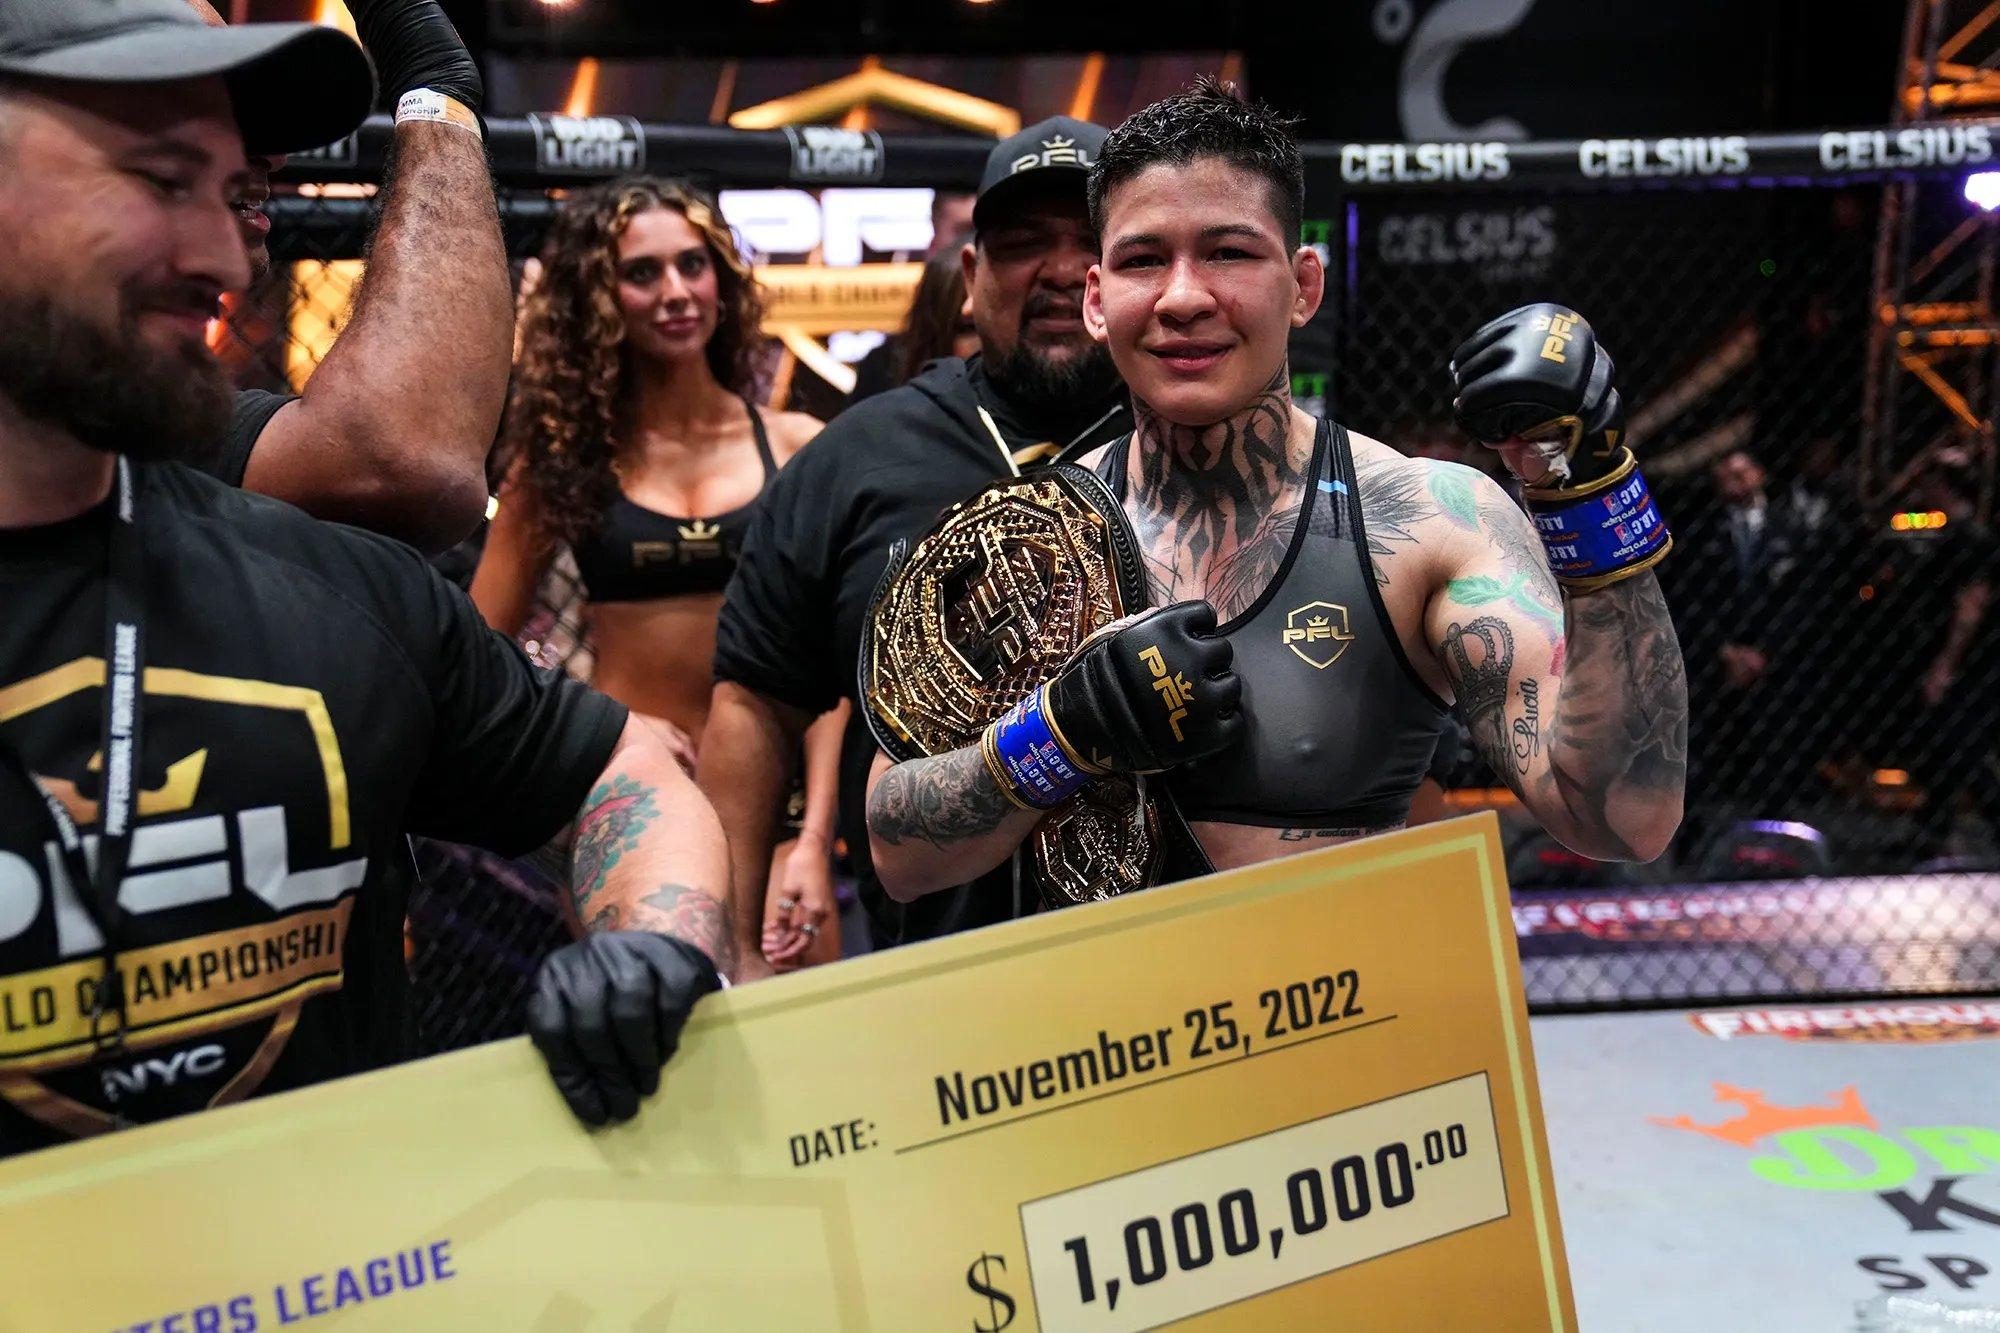 Pacheco with her $1 million check after defeating Kayla Harrison to win the 2022 PFL Finals at Women's Lightweight. Photo by Cooper Neill/PFL.